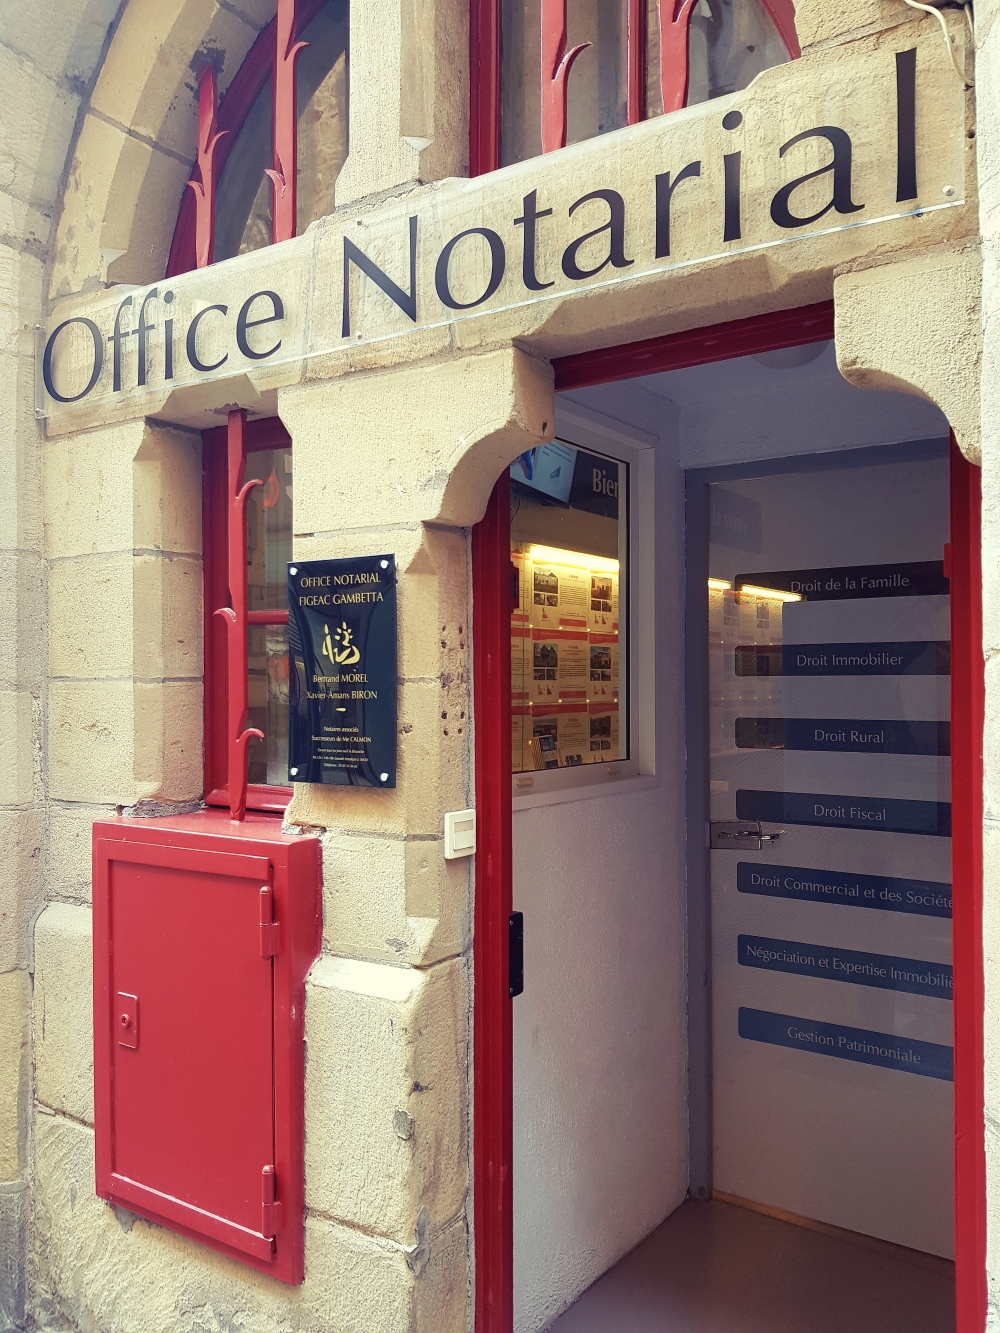 OFFICE NOTARIAL FIGEAC GAMBETTA MOREL BIRON NOTAIRE LOT IMMOBILIER